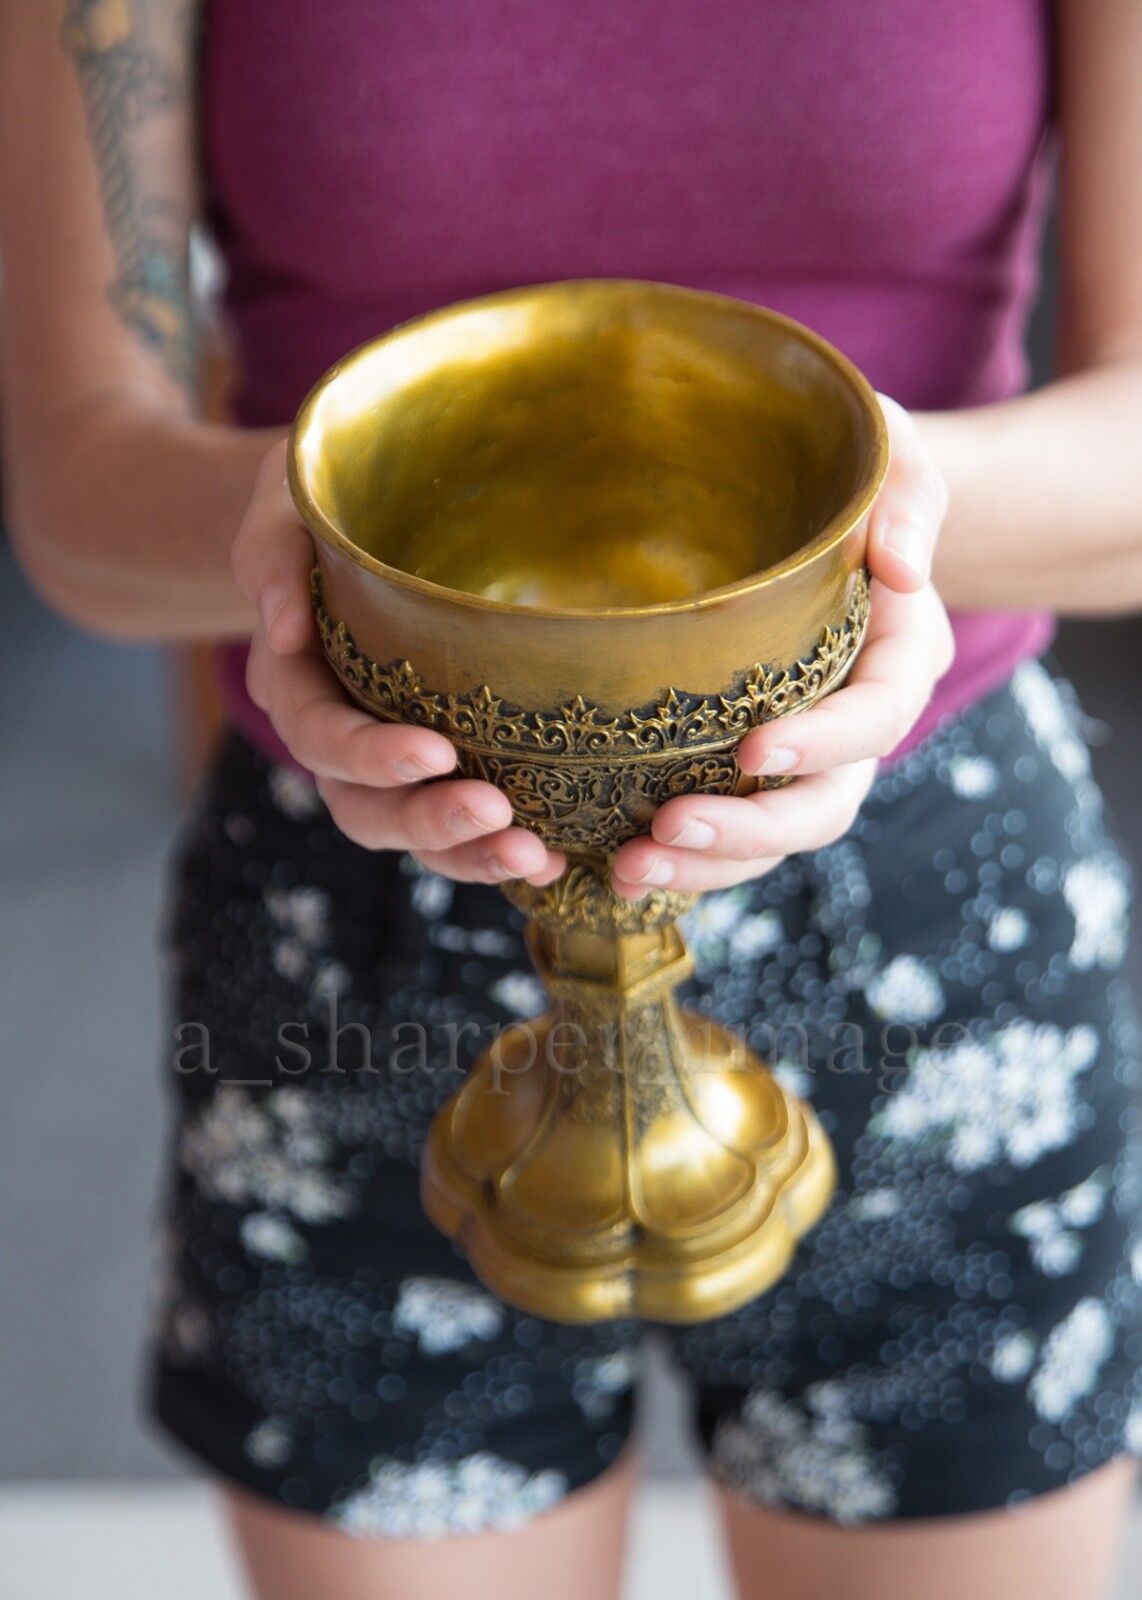 Large Golden Chalice Ritual Goblet Hand-Painted Metallic Finish Excellent Detail